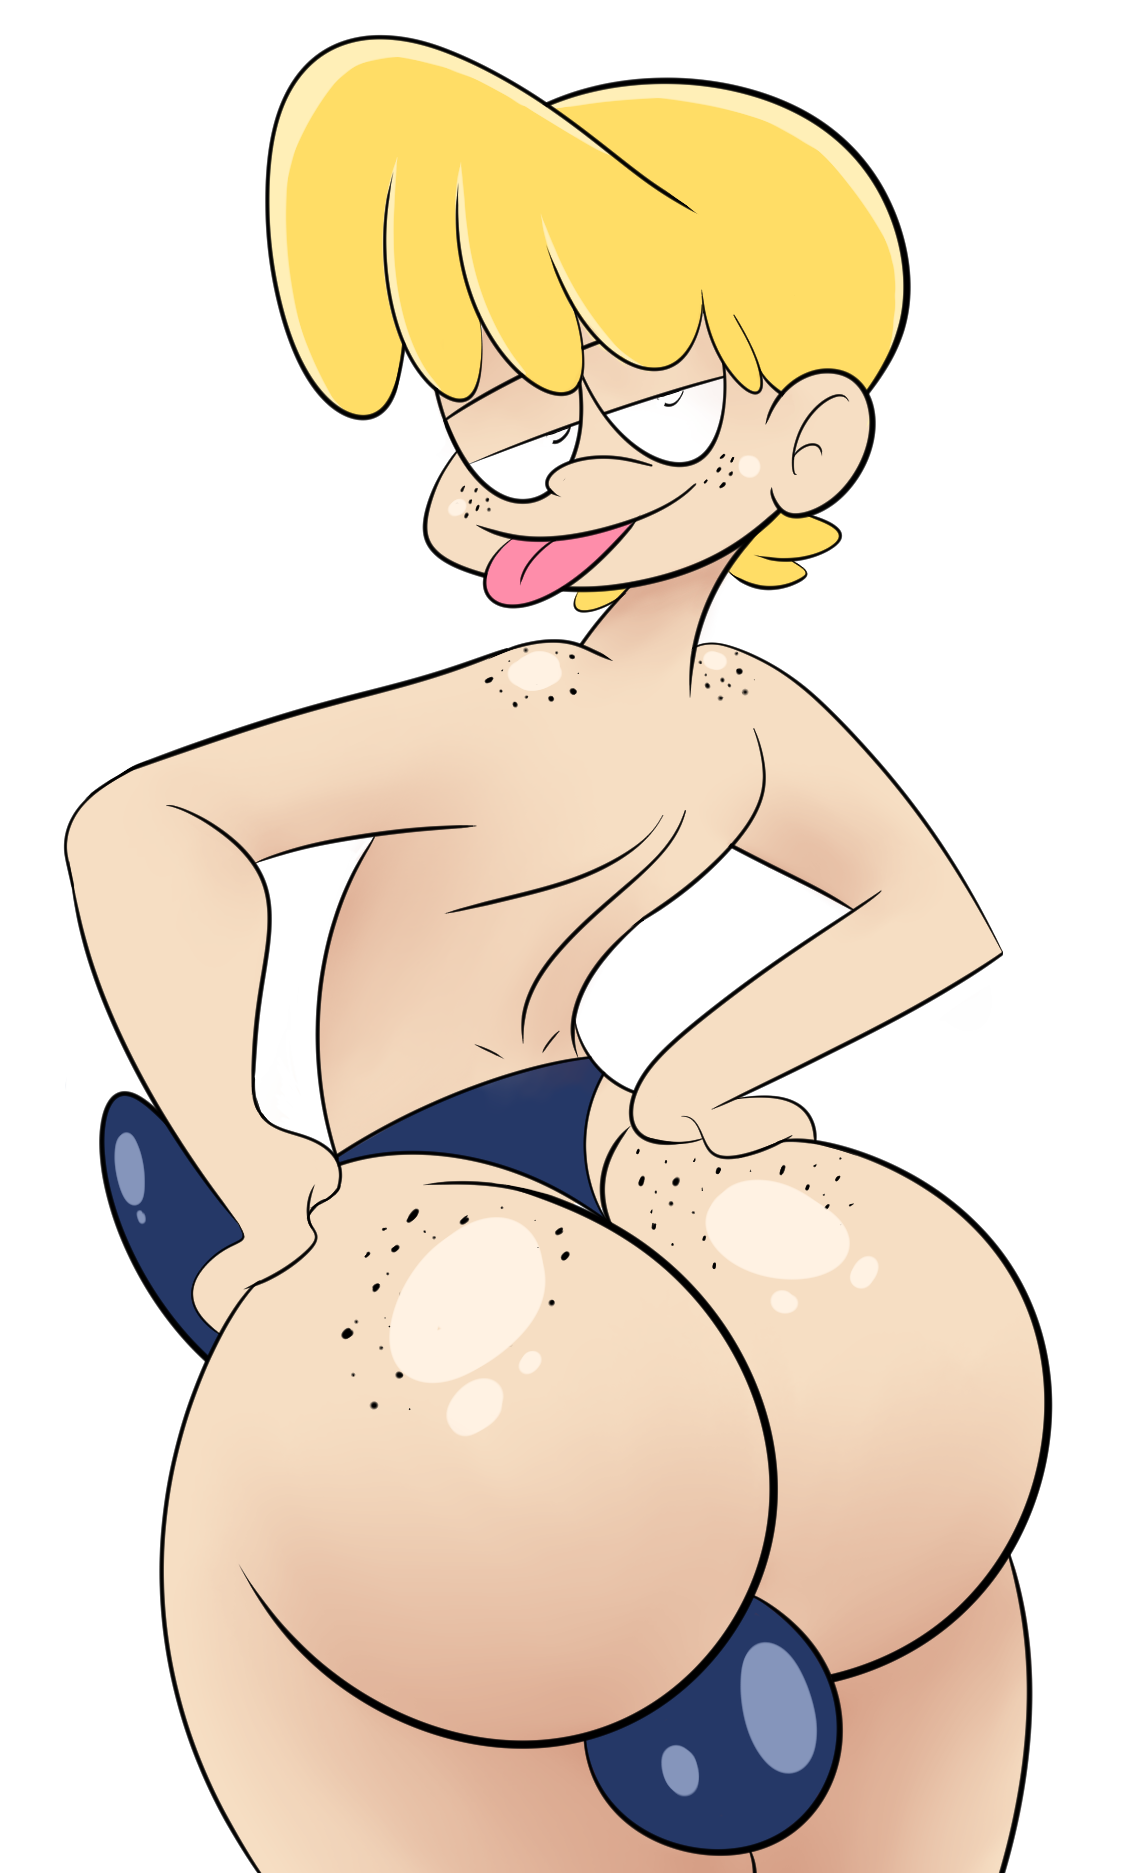 ohboythisisfunky: August, best butt around. Drawn by @regacen colored by me 